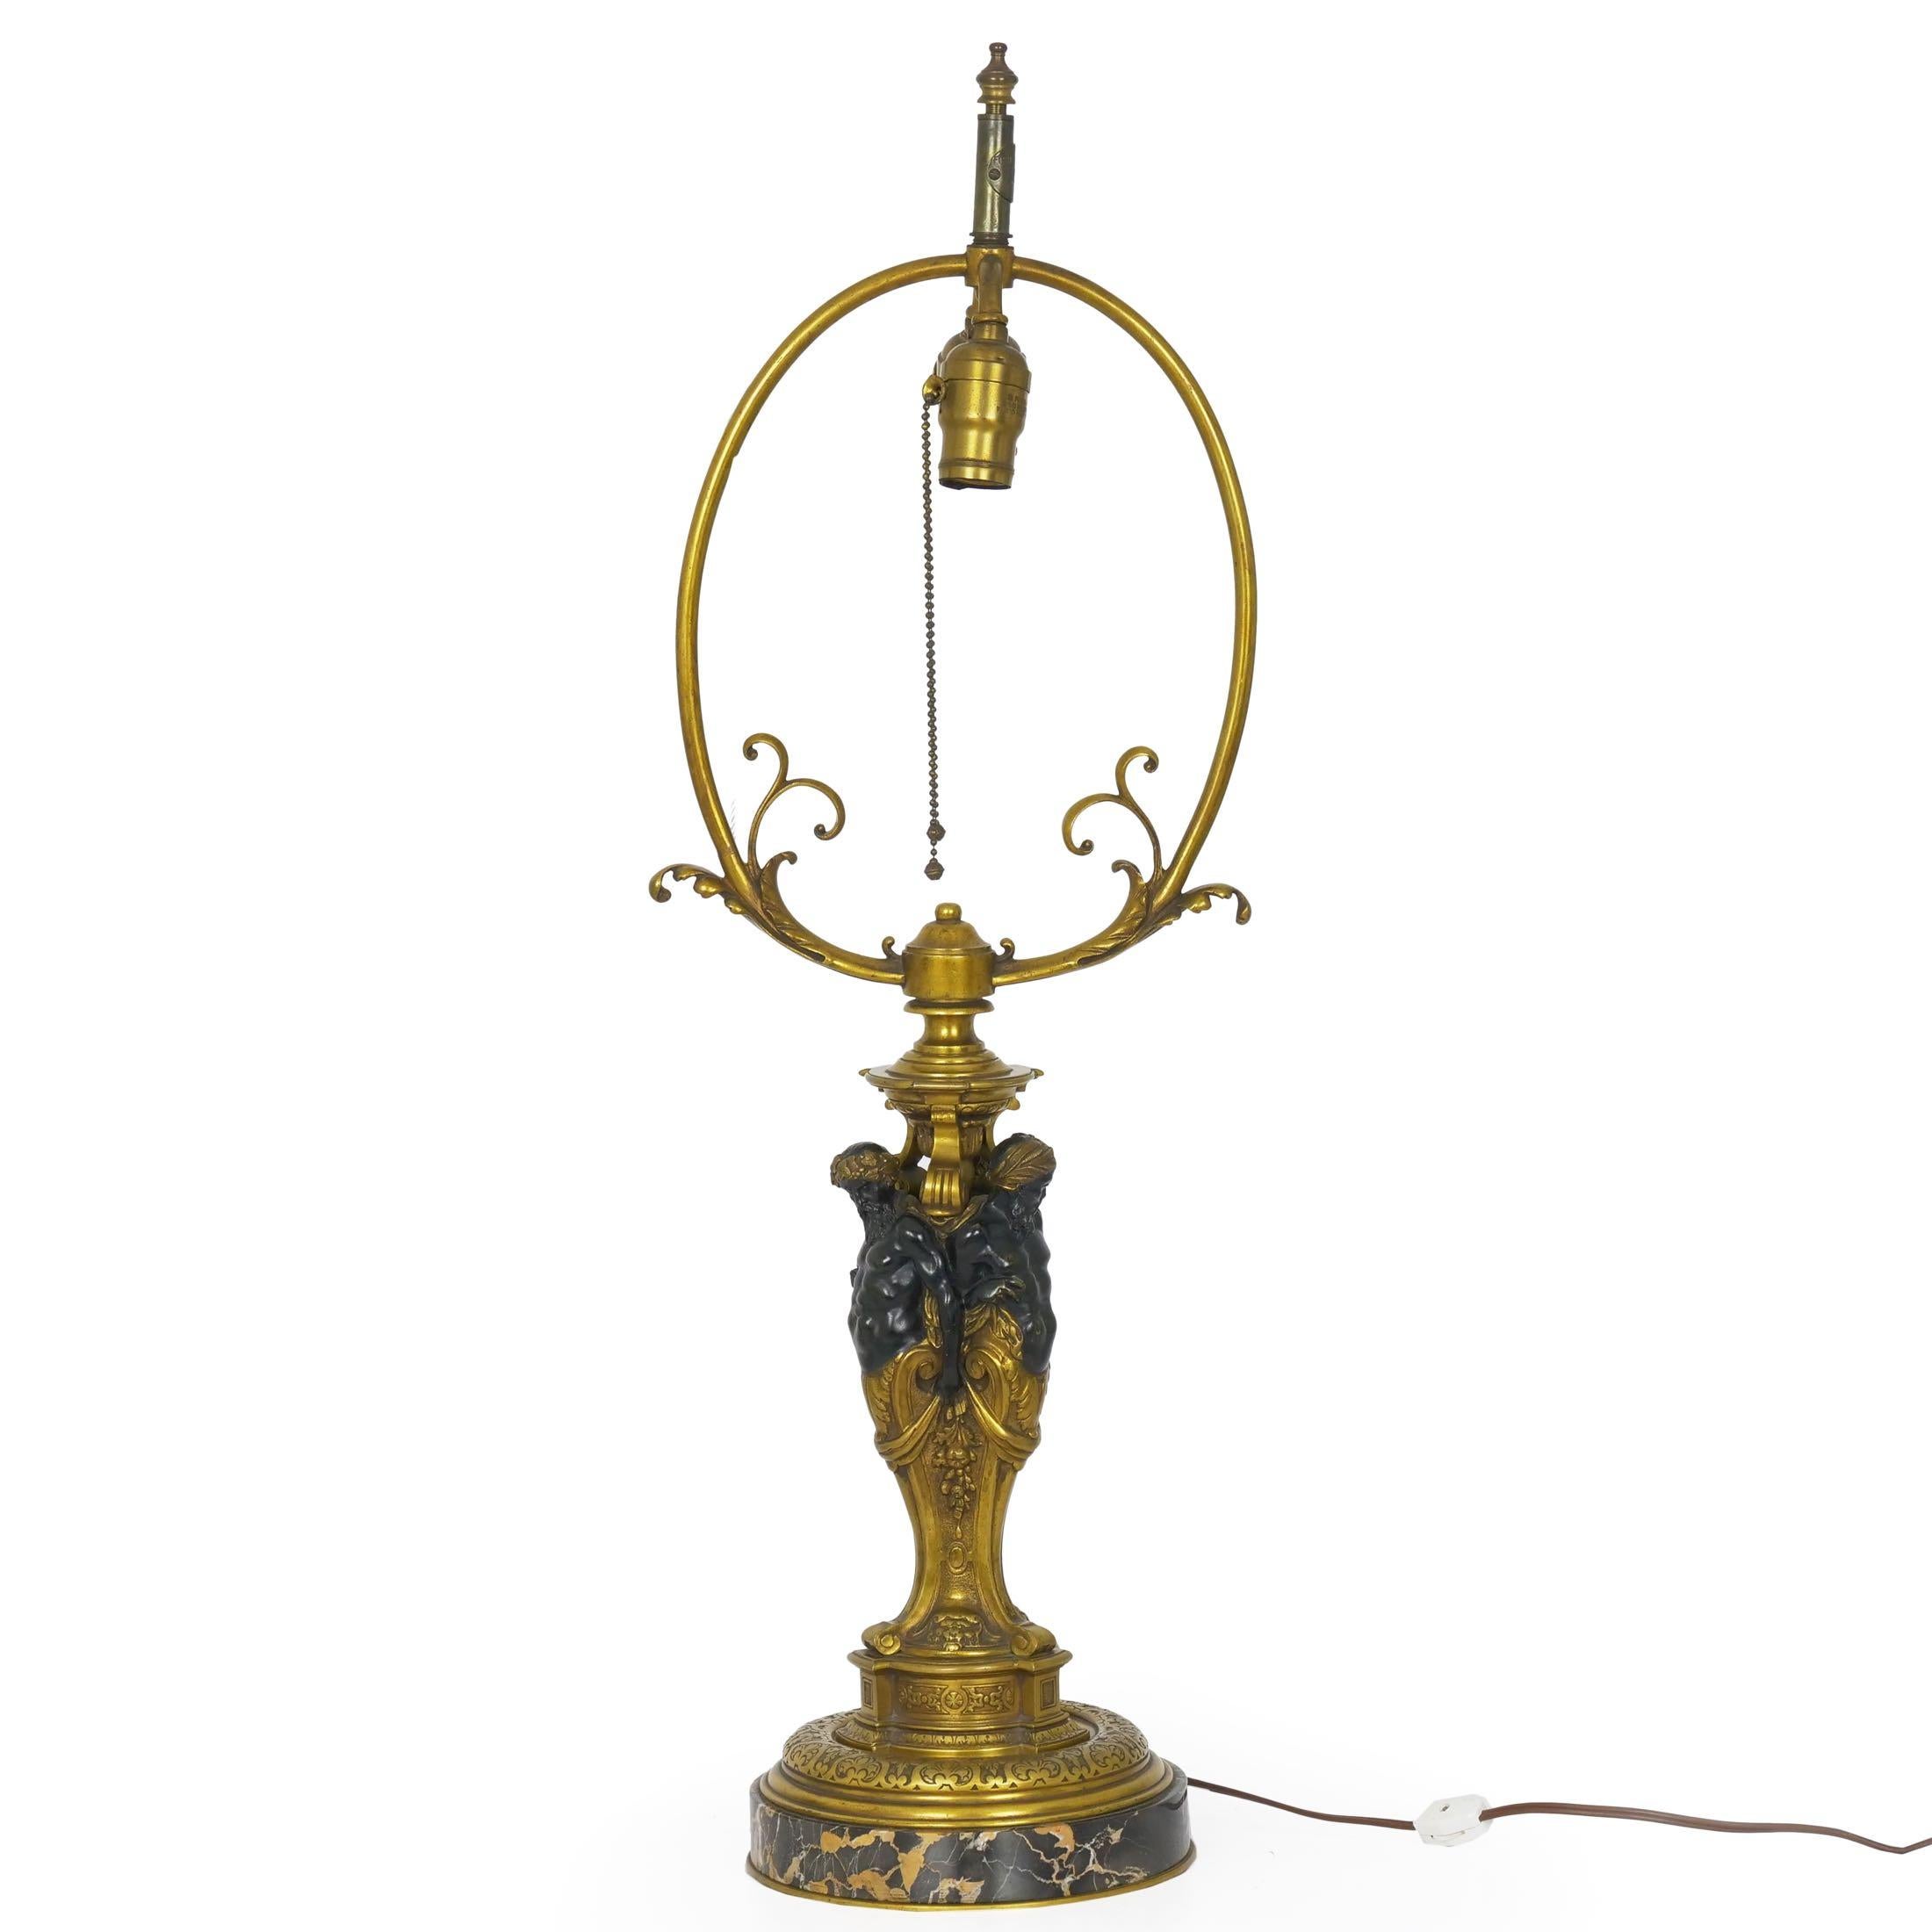 An inordinately fine cast bronze table lamp, the piece features three male figures that rise from a cabriole stem of acanthus. Each figure is unique, so while all are looking slightly leftward they each are captured with subtle variations; for